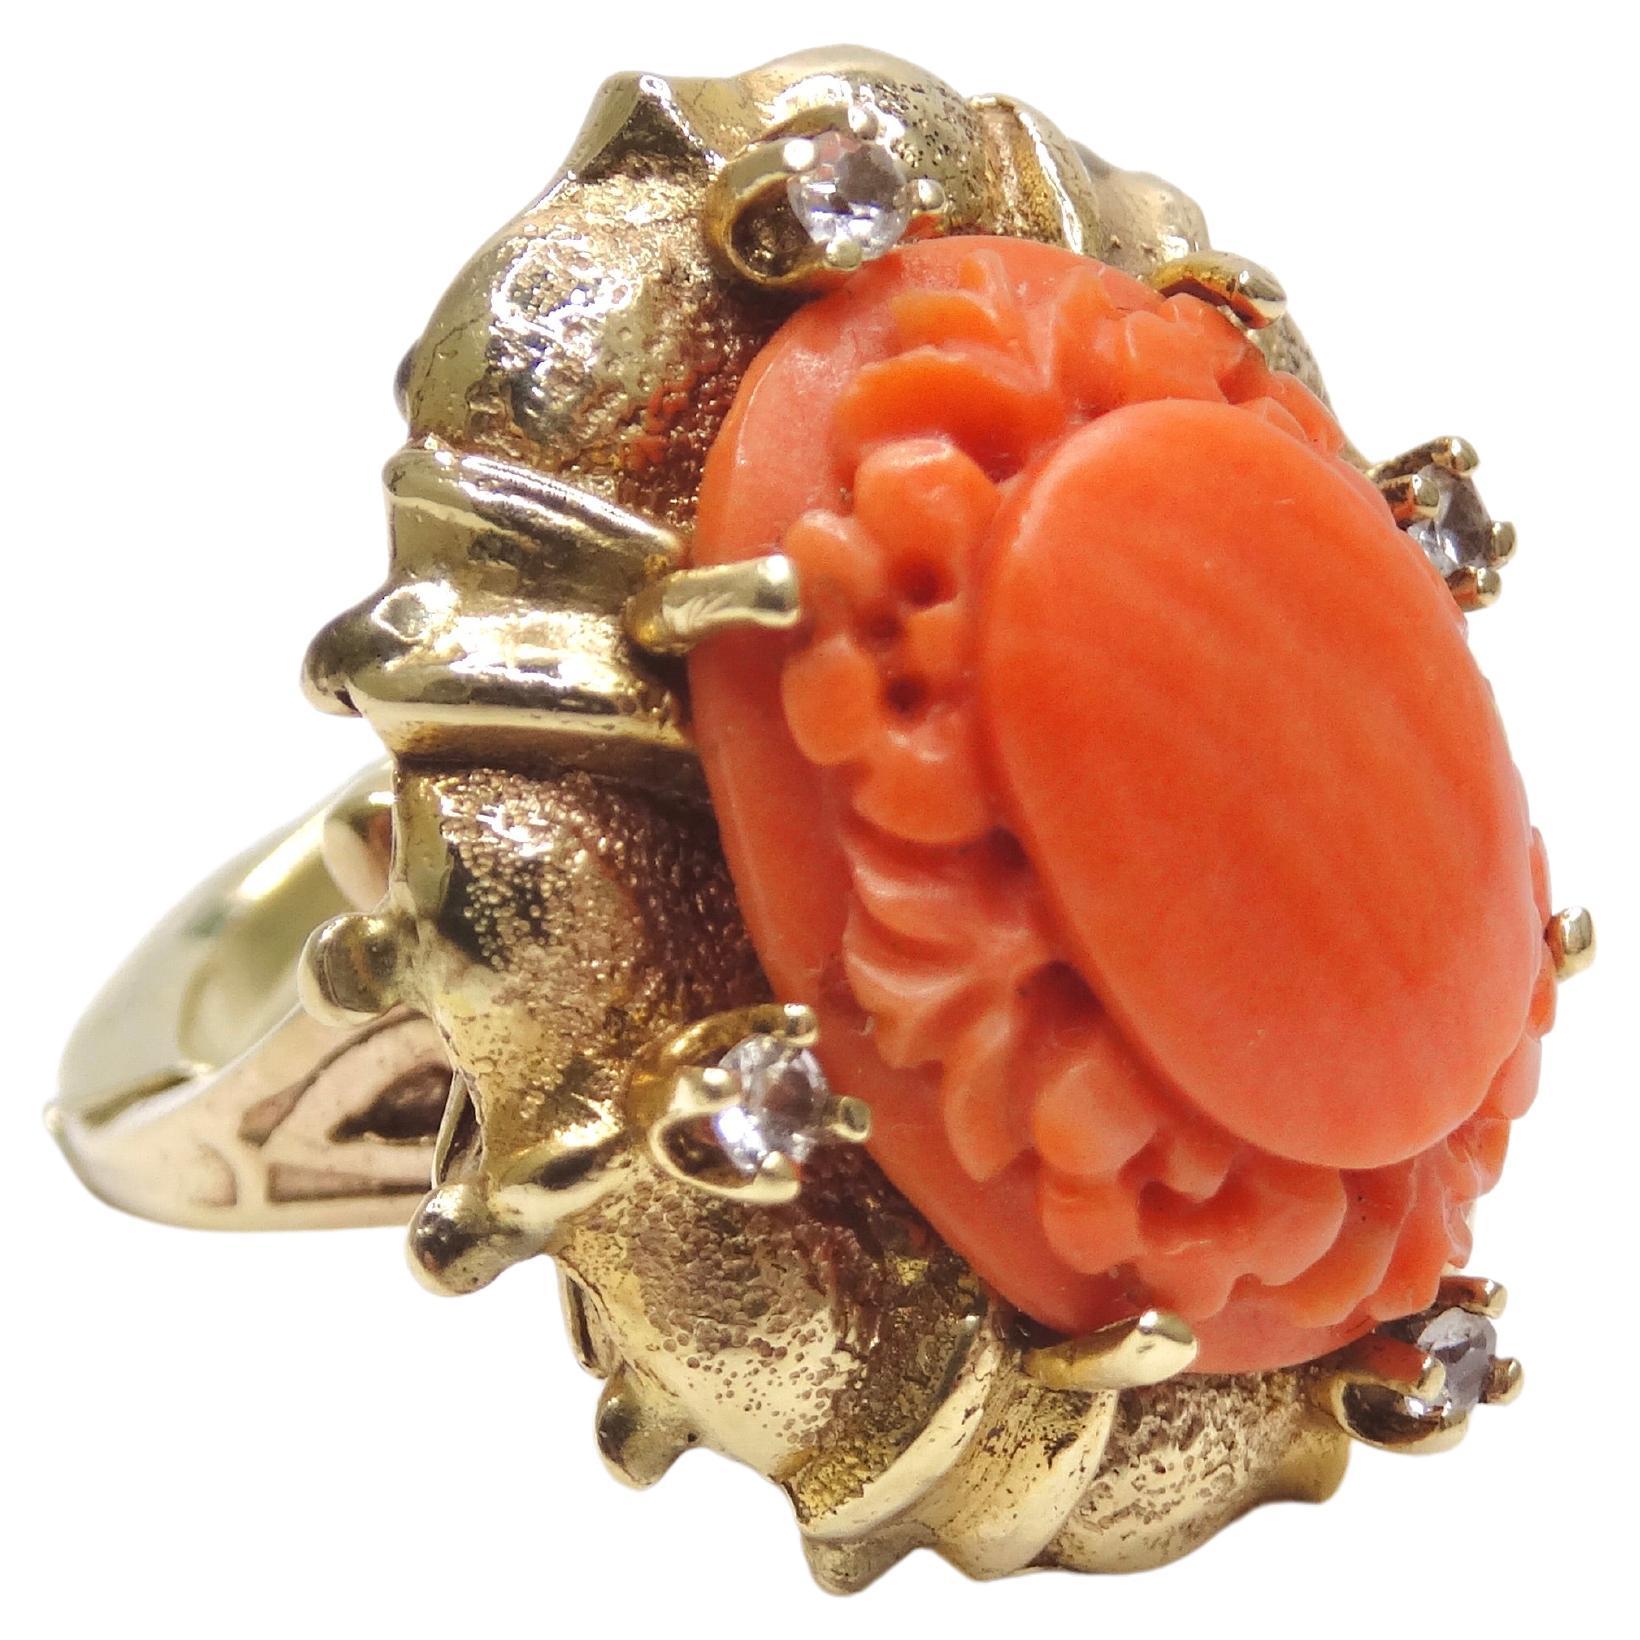 Mediterranean Coral 14k Gold Cocktail Ring with Diamonds